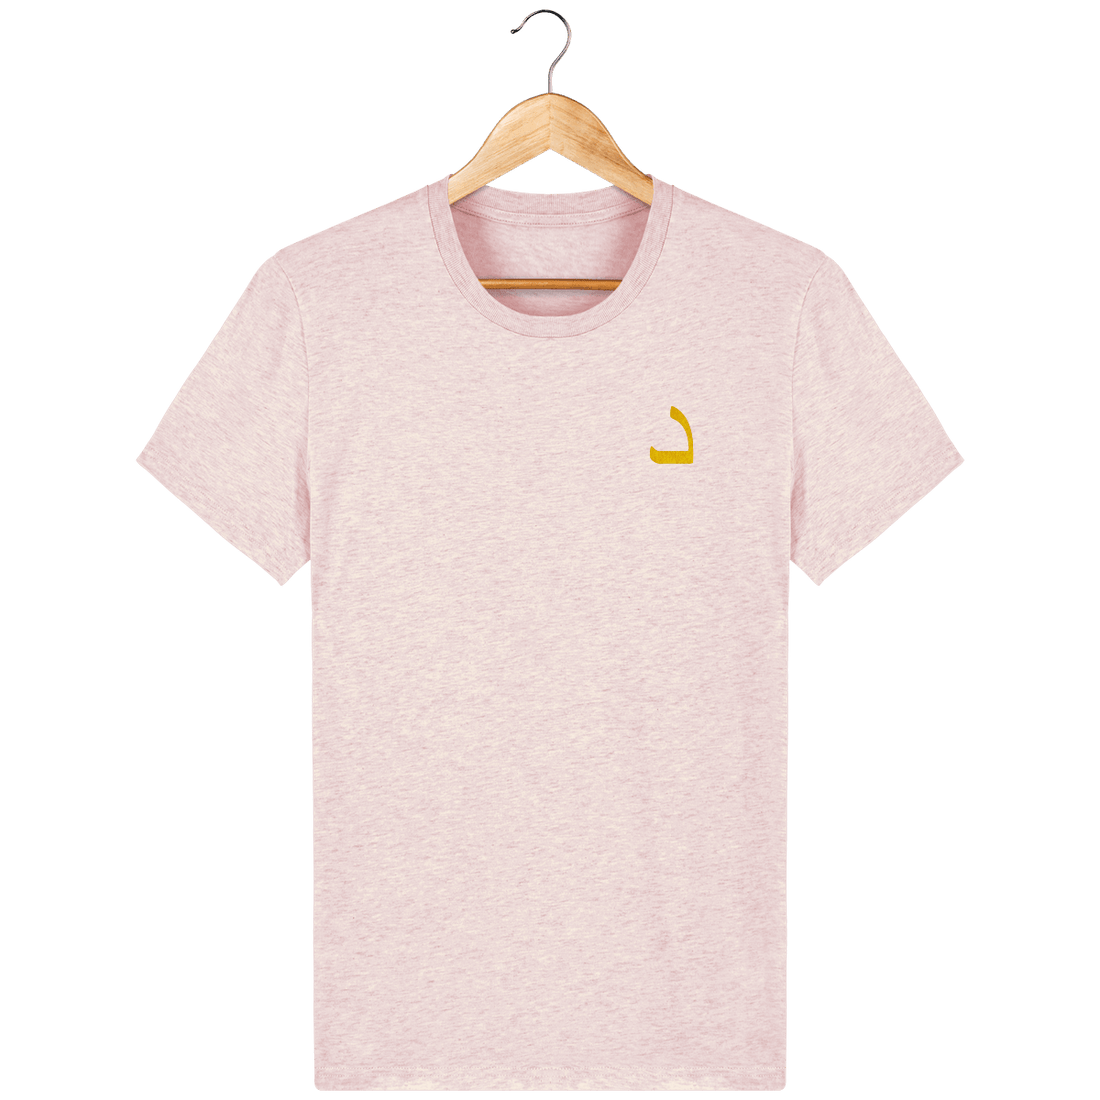 Unisexe>Tee-shirts - T-Shirt Homme <br>  Lettre Arabe Daal